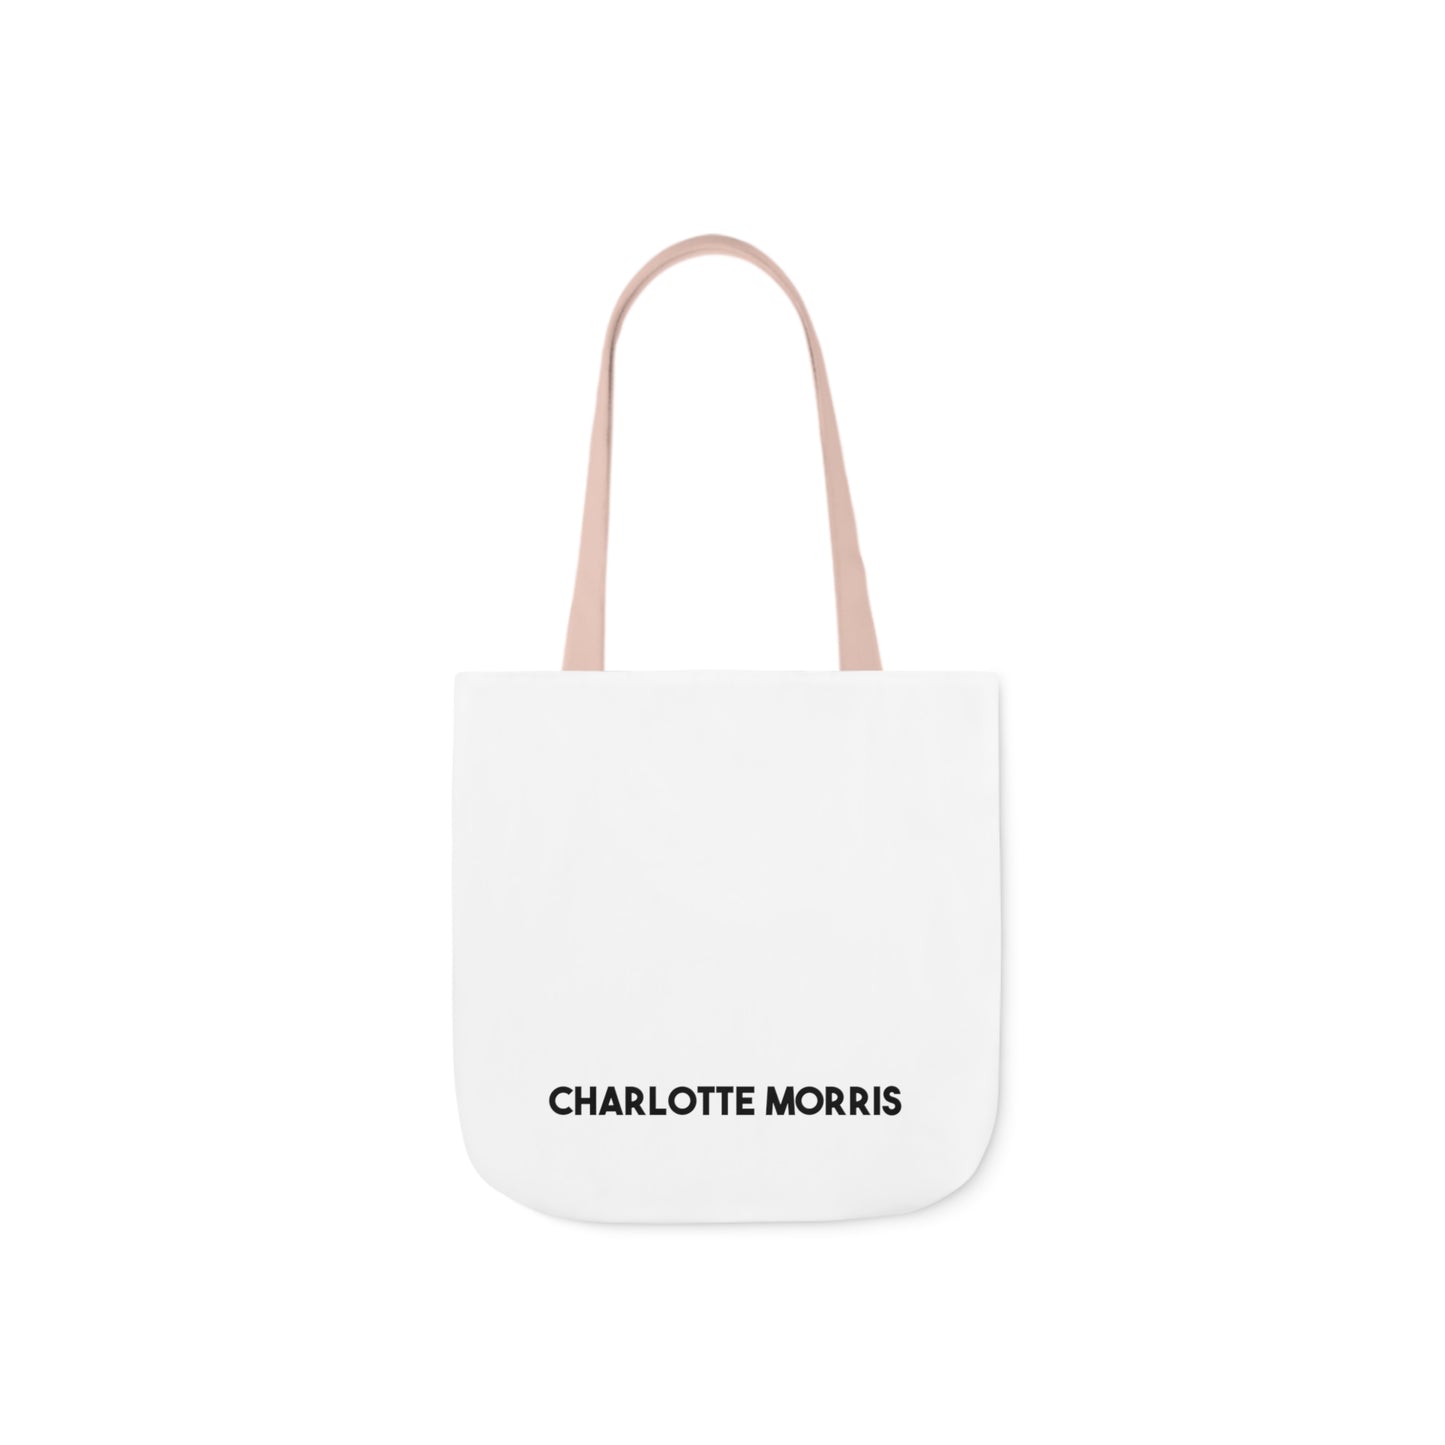 This Time 'Round Tote Bag